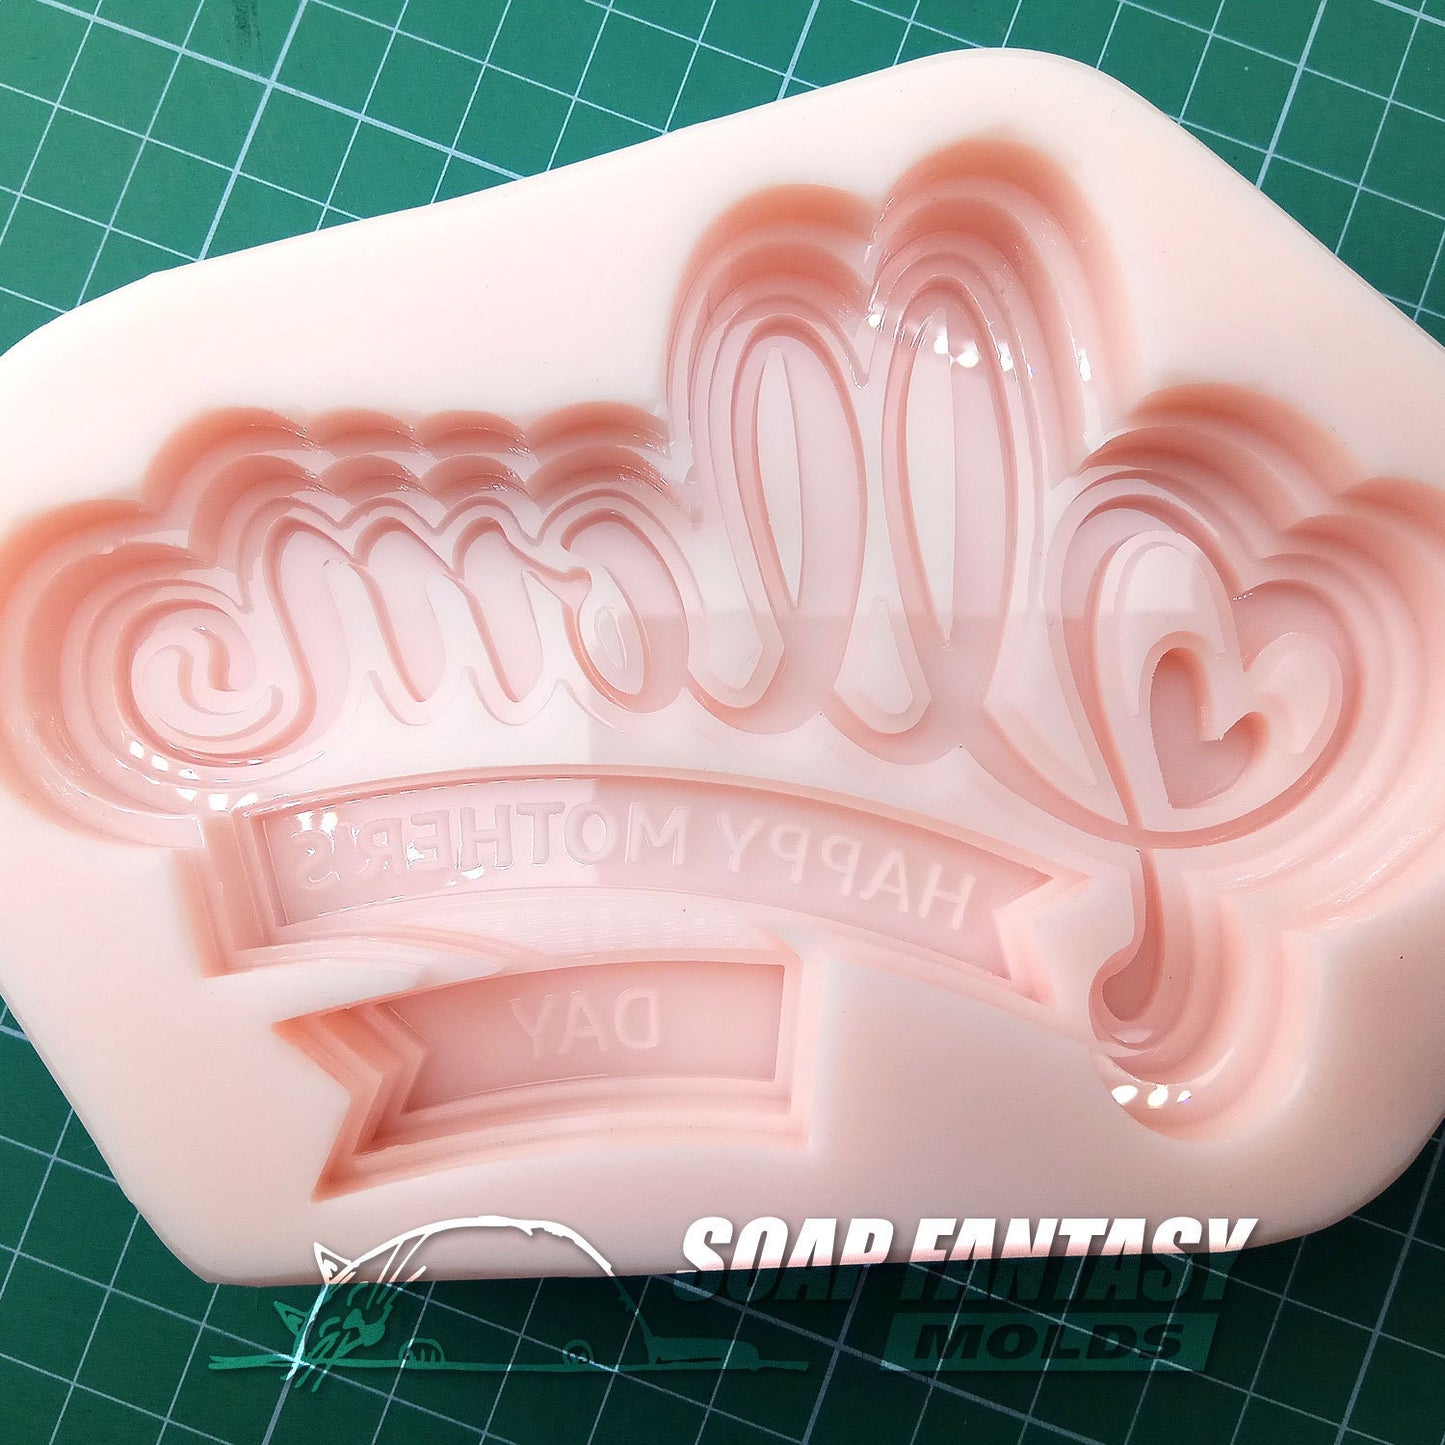 Happy Mother's Day best wishes "Love Mom" silicone mold for soap making